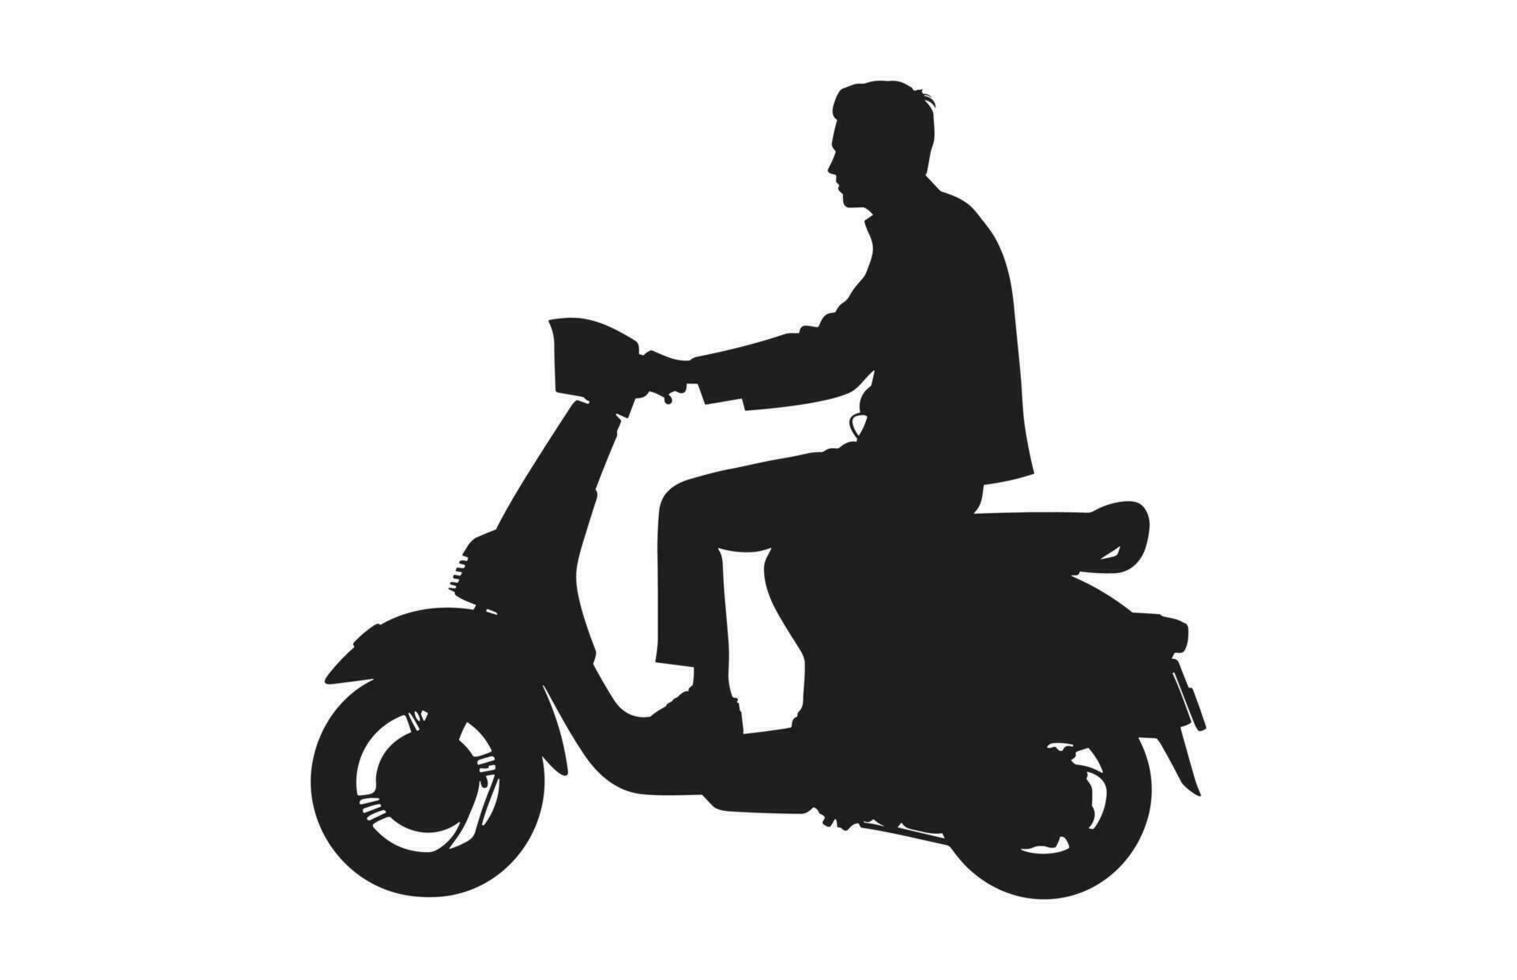 A Person Riding Scooter Vector Silhouette isolated on a white background